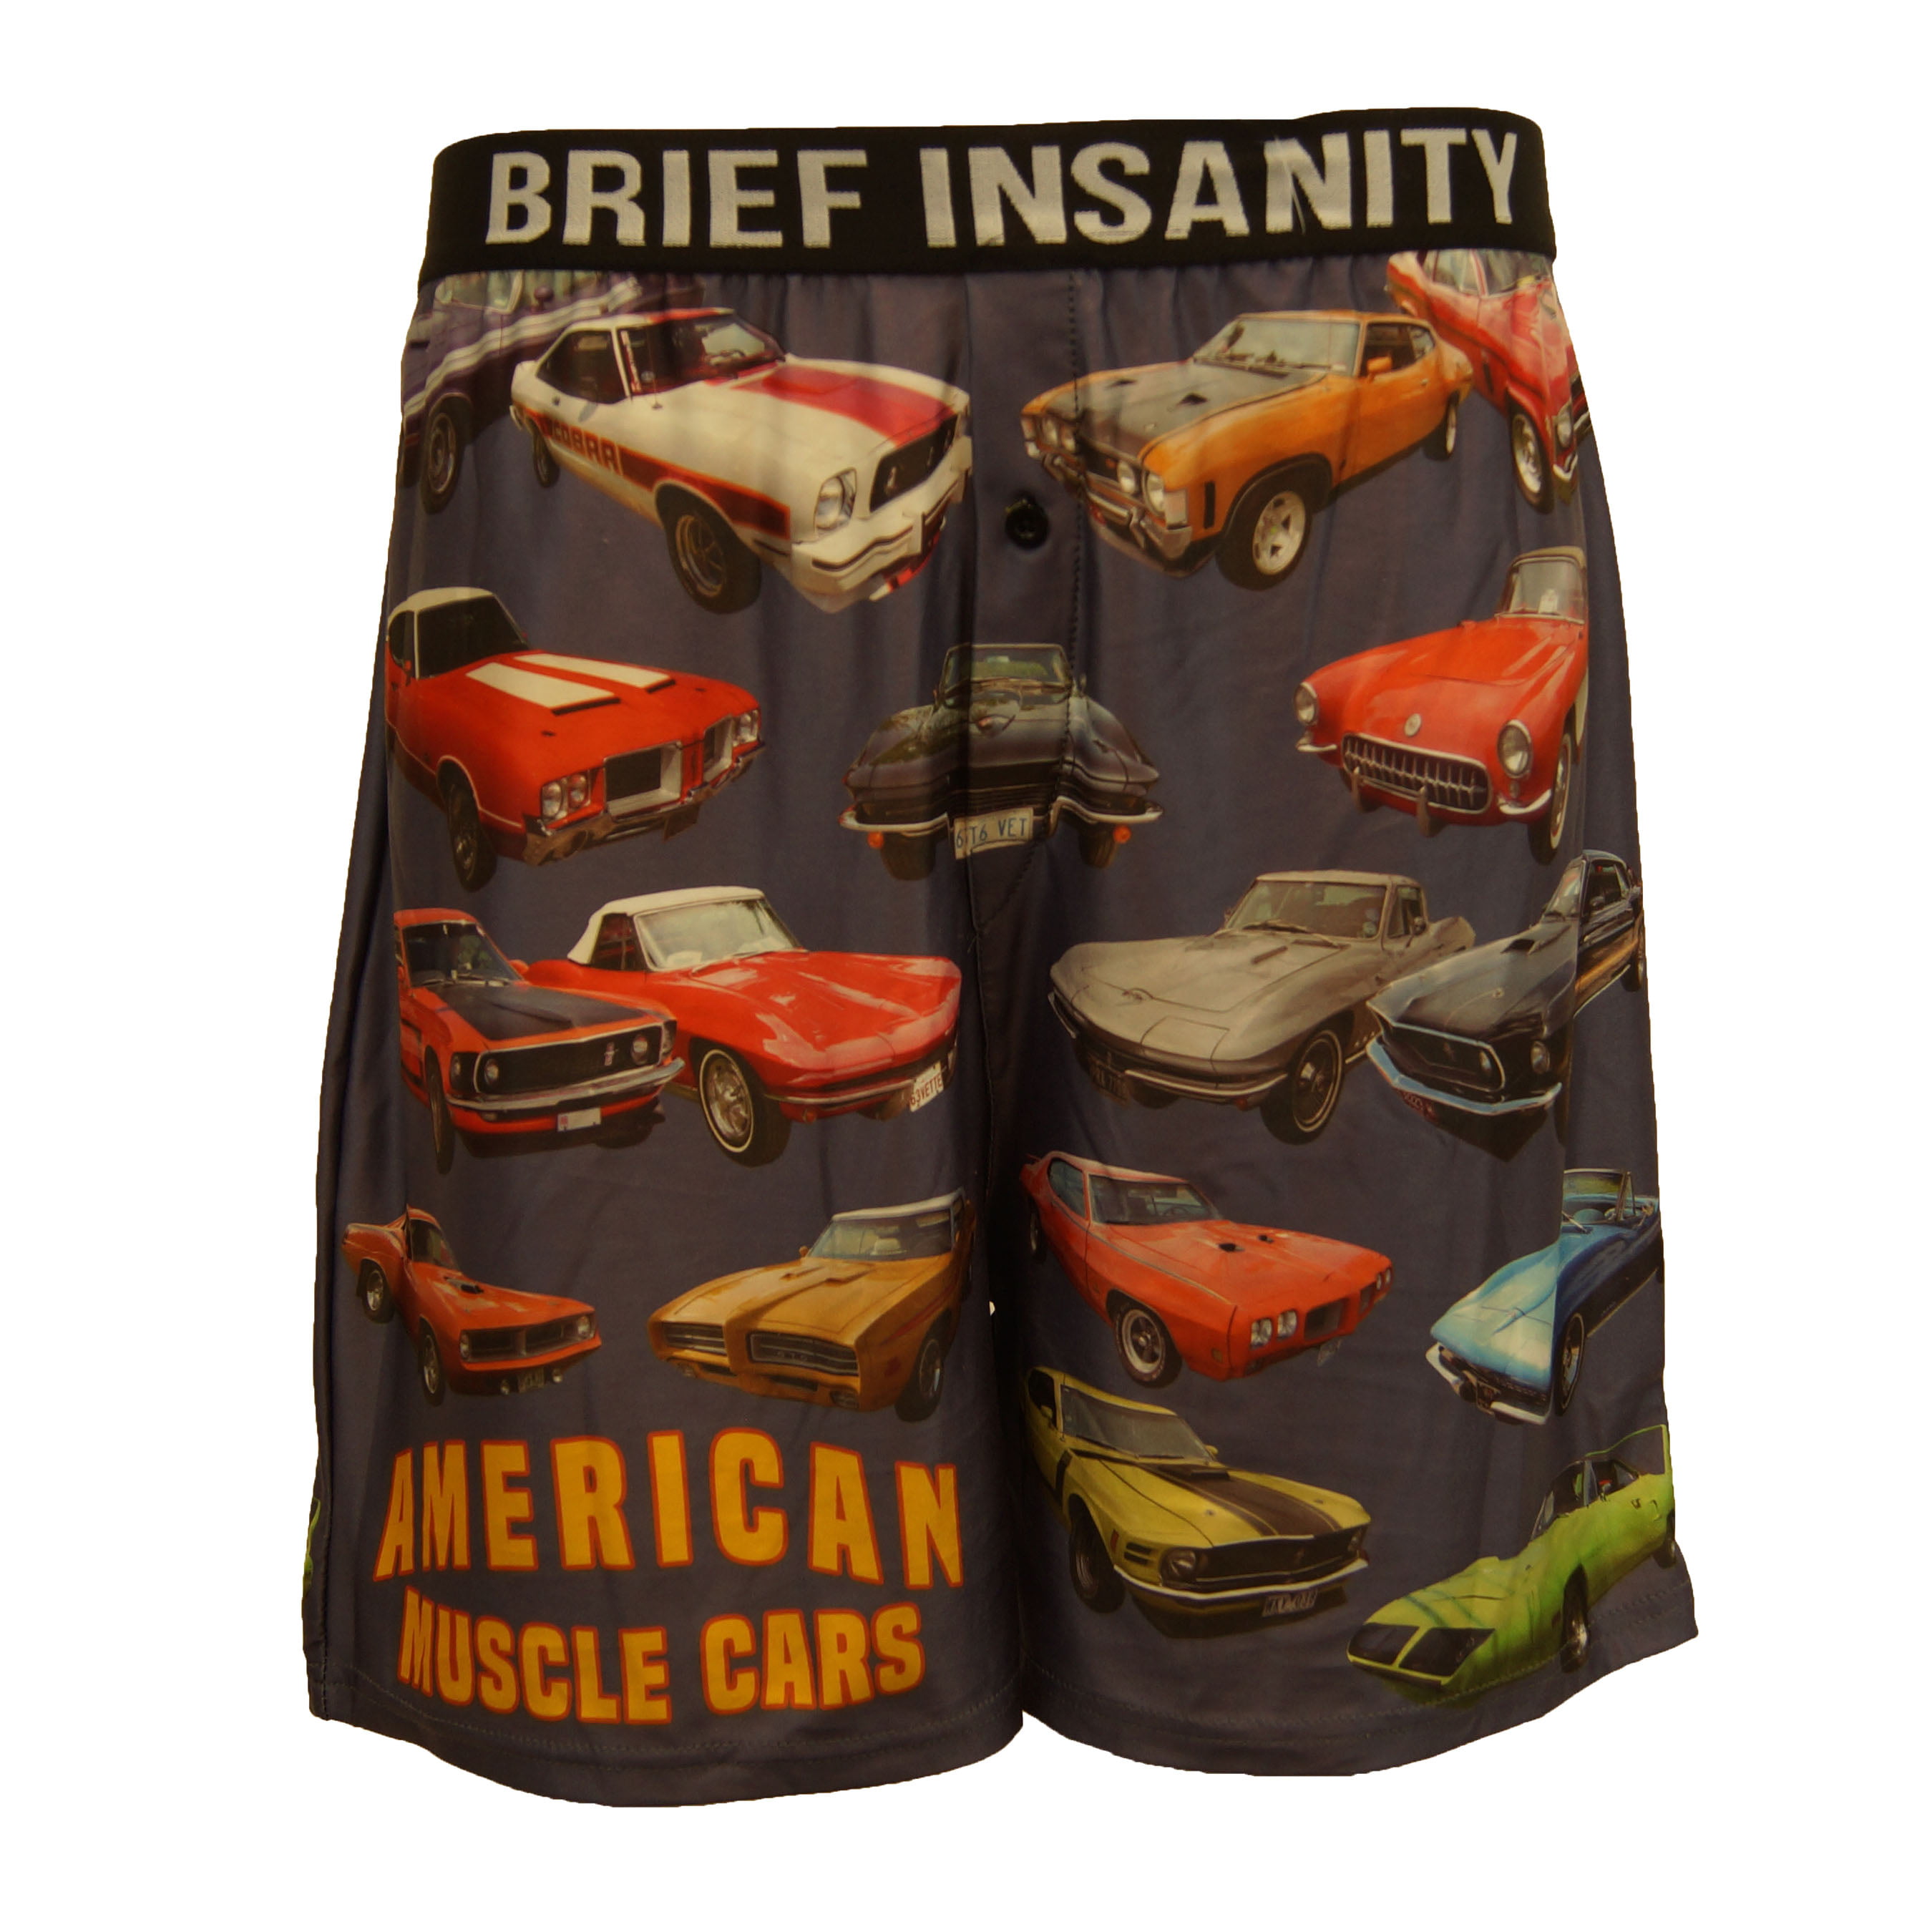 BRIEF INSANITY Mens Boxer Shorts Underwear Mouse and Cheese Print 